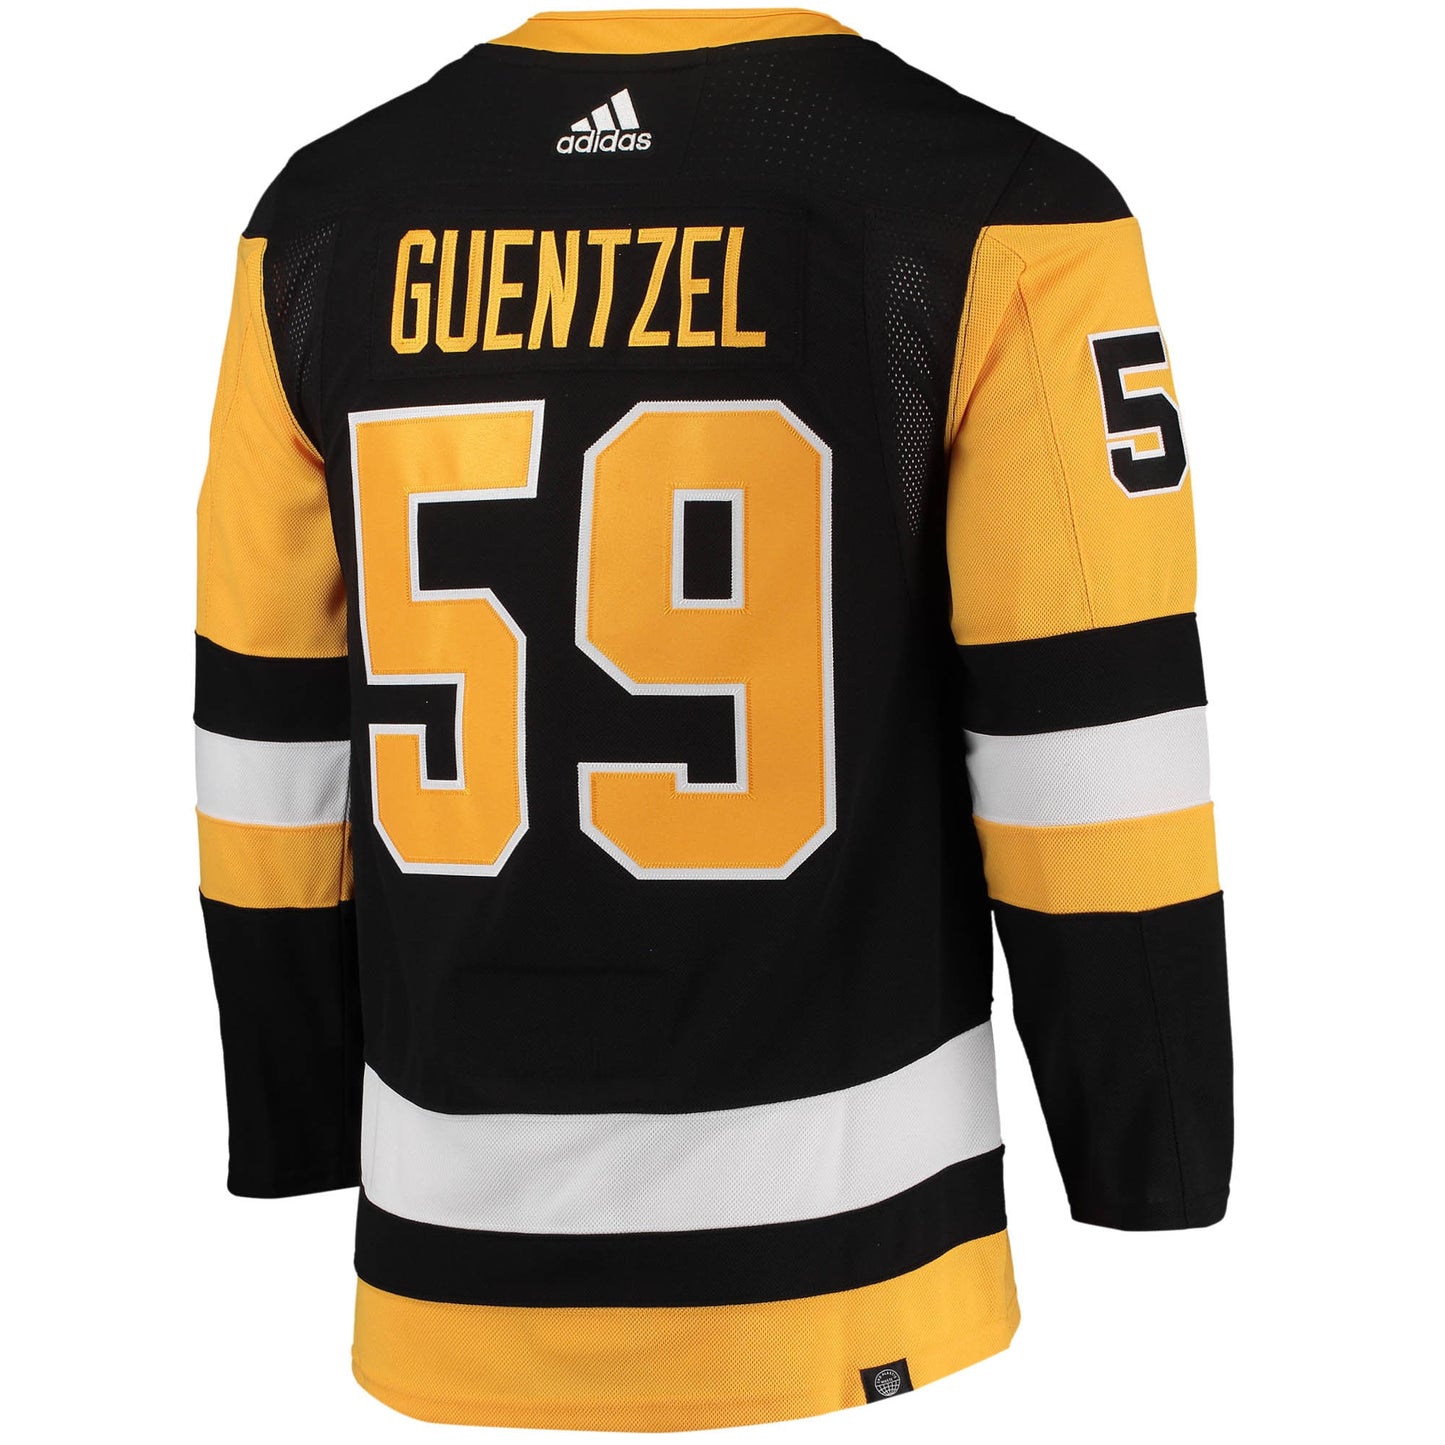 Jake Guentzel Pittsburgh Penguins adidas Home Primegreen Authentic Pro Player Jersey - Black